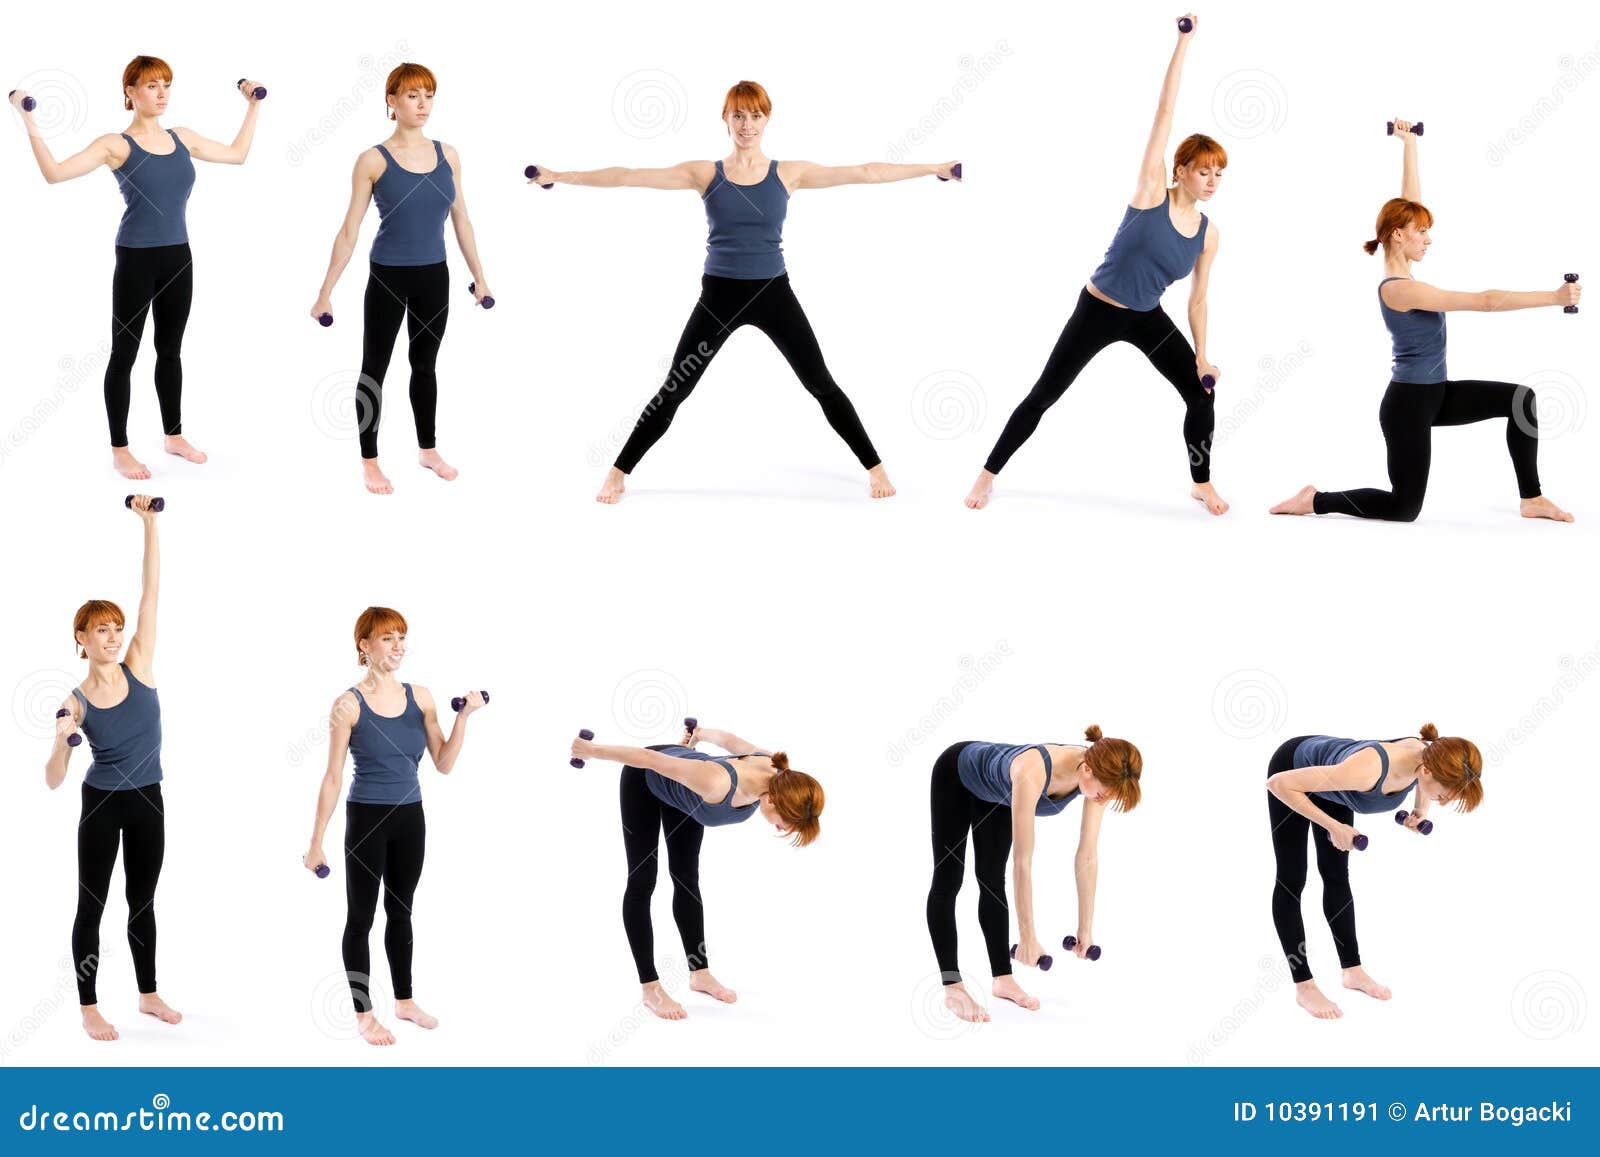 Woman with Dumbbells in Various Poses Stock Image - Image of built, health:  10391191